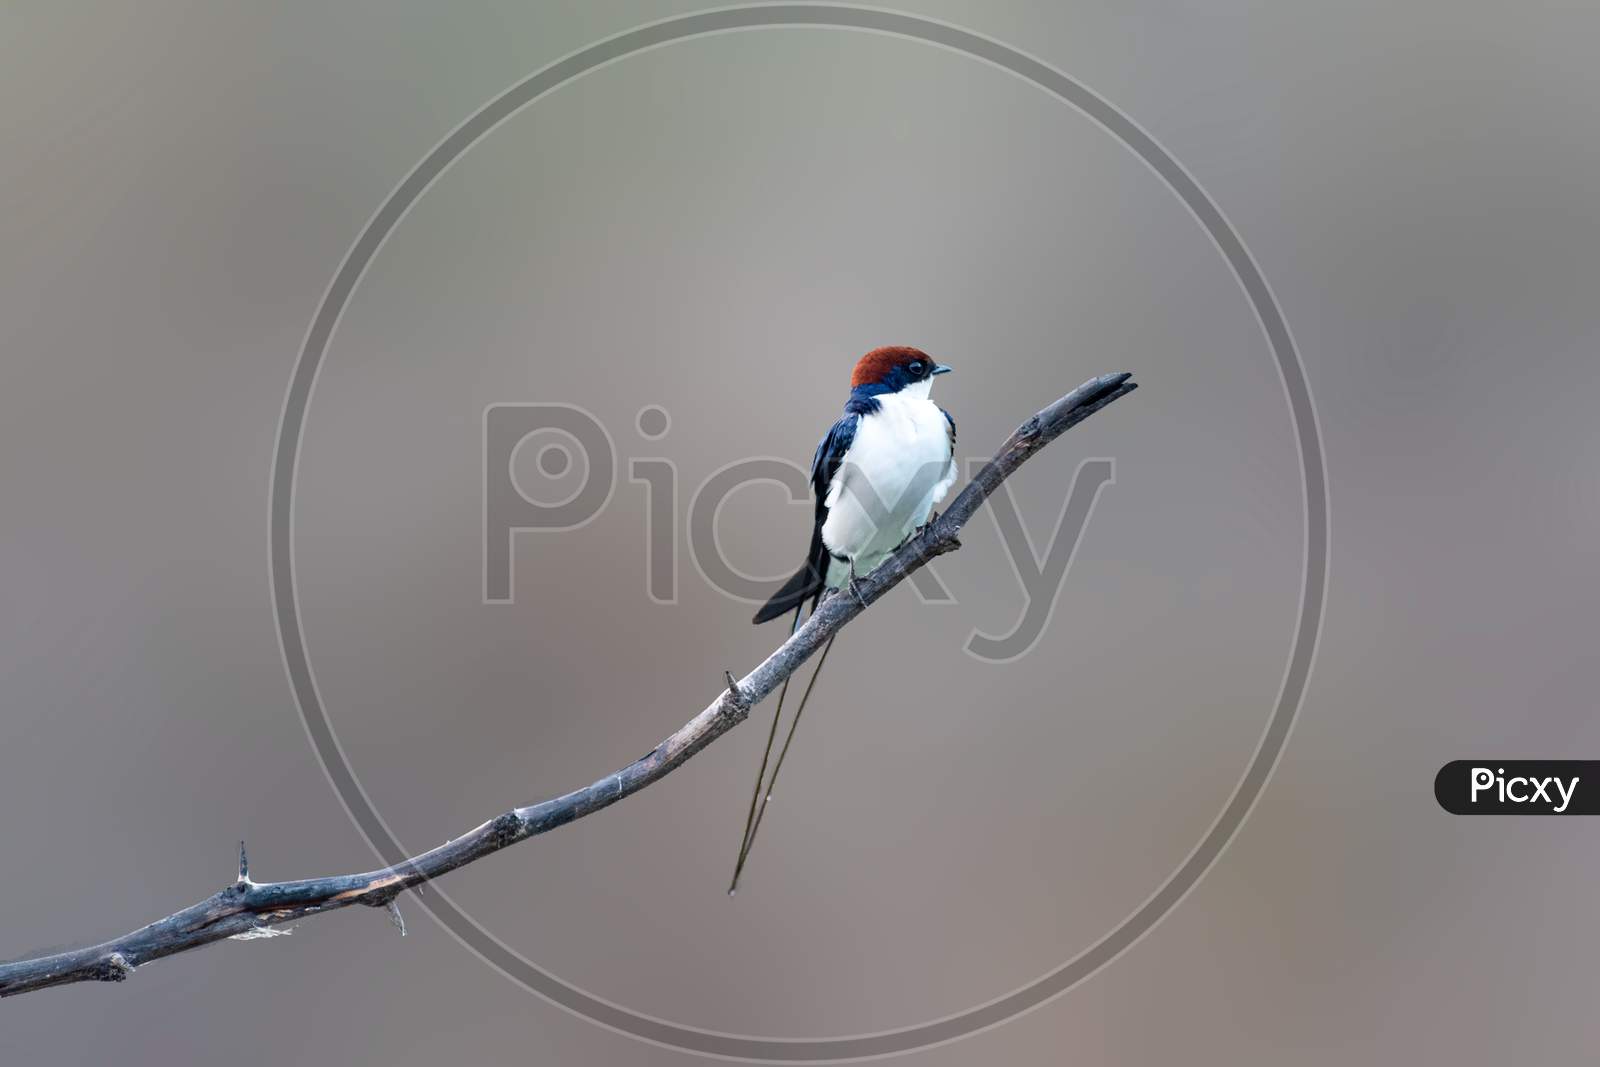 The Wire-tailed Swallow